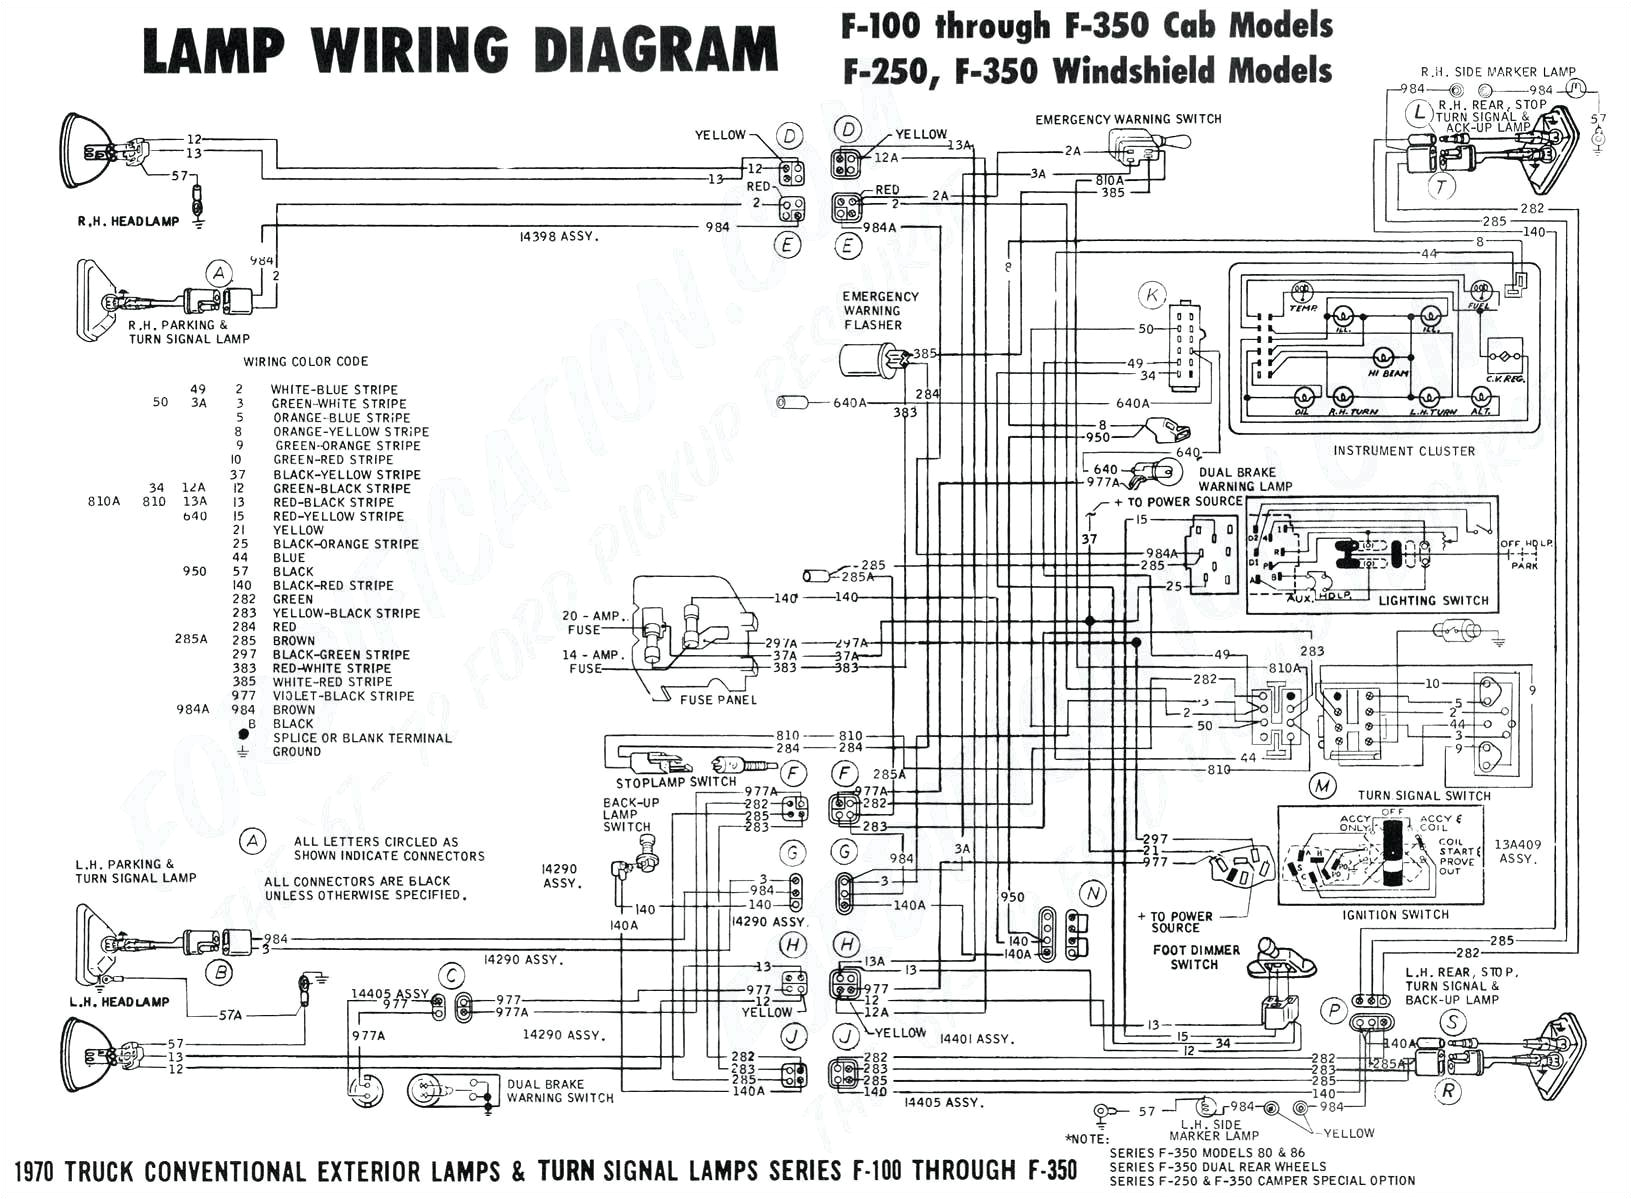 stereo diagram car wiring jvcr840bt wiring diagrams konsult 1ls wiring harness wiring diagram library stereo diagram